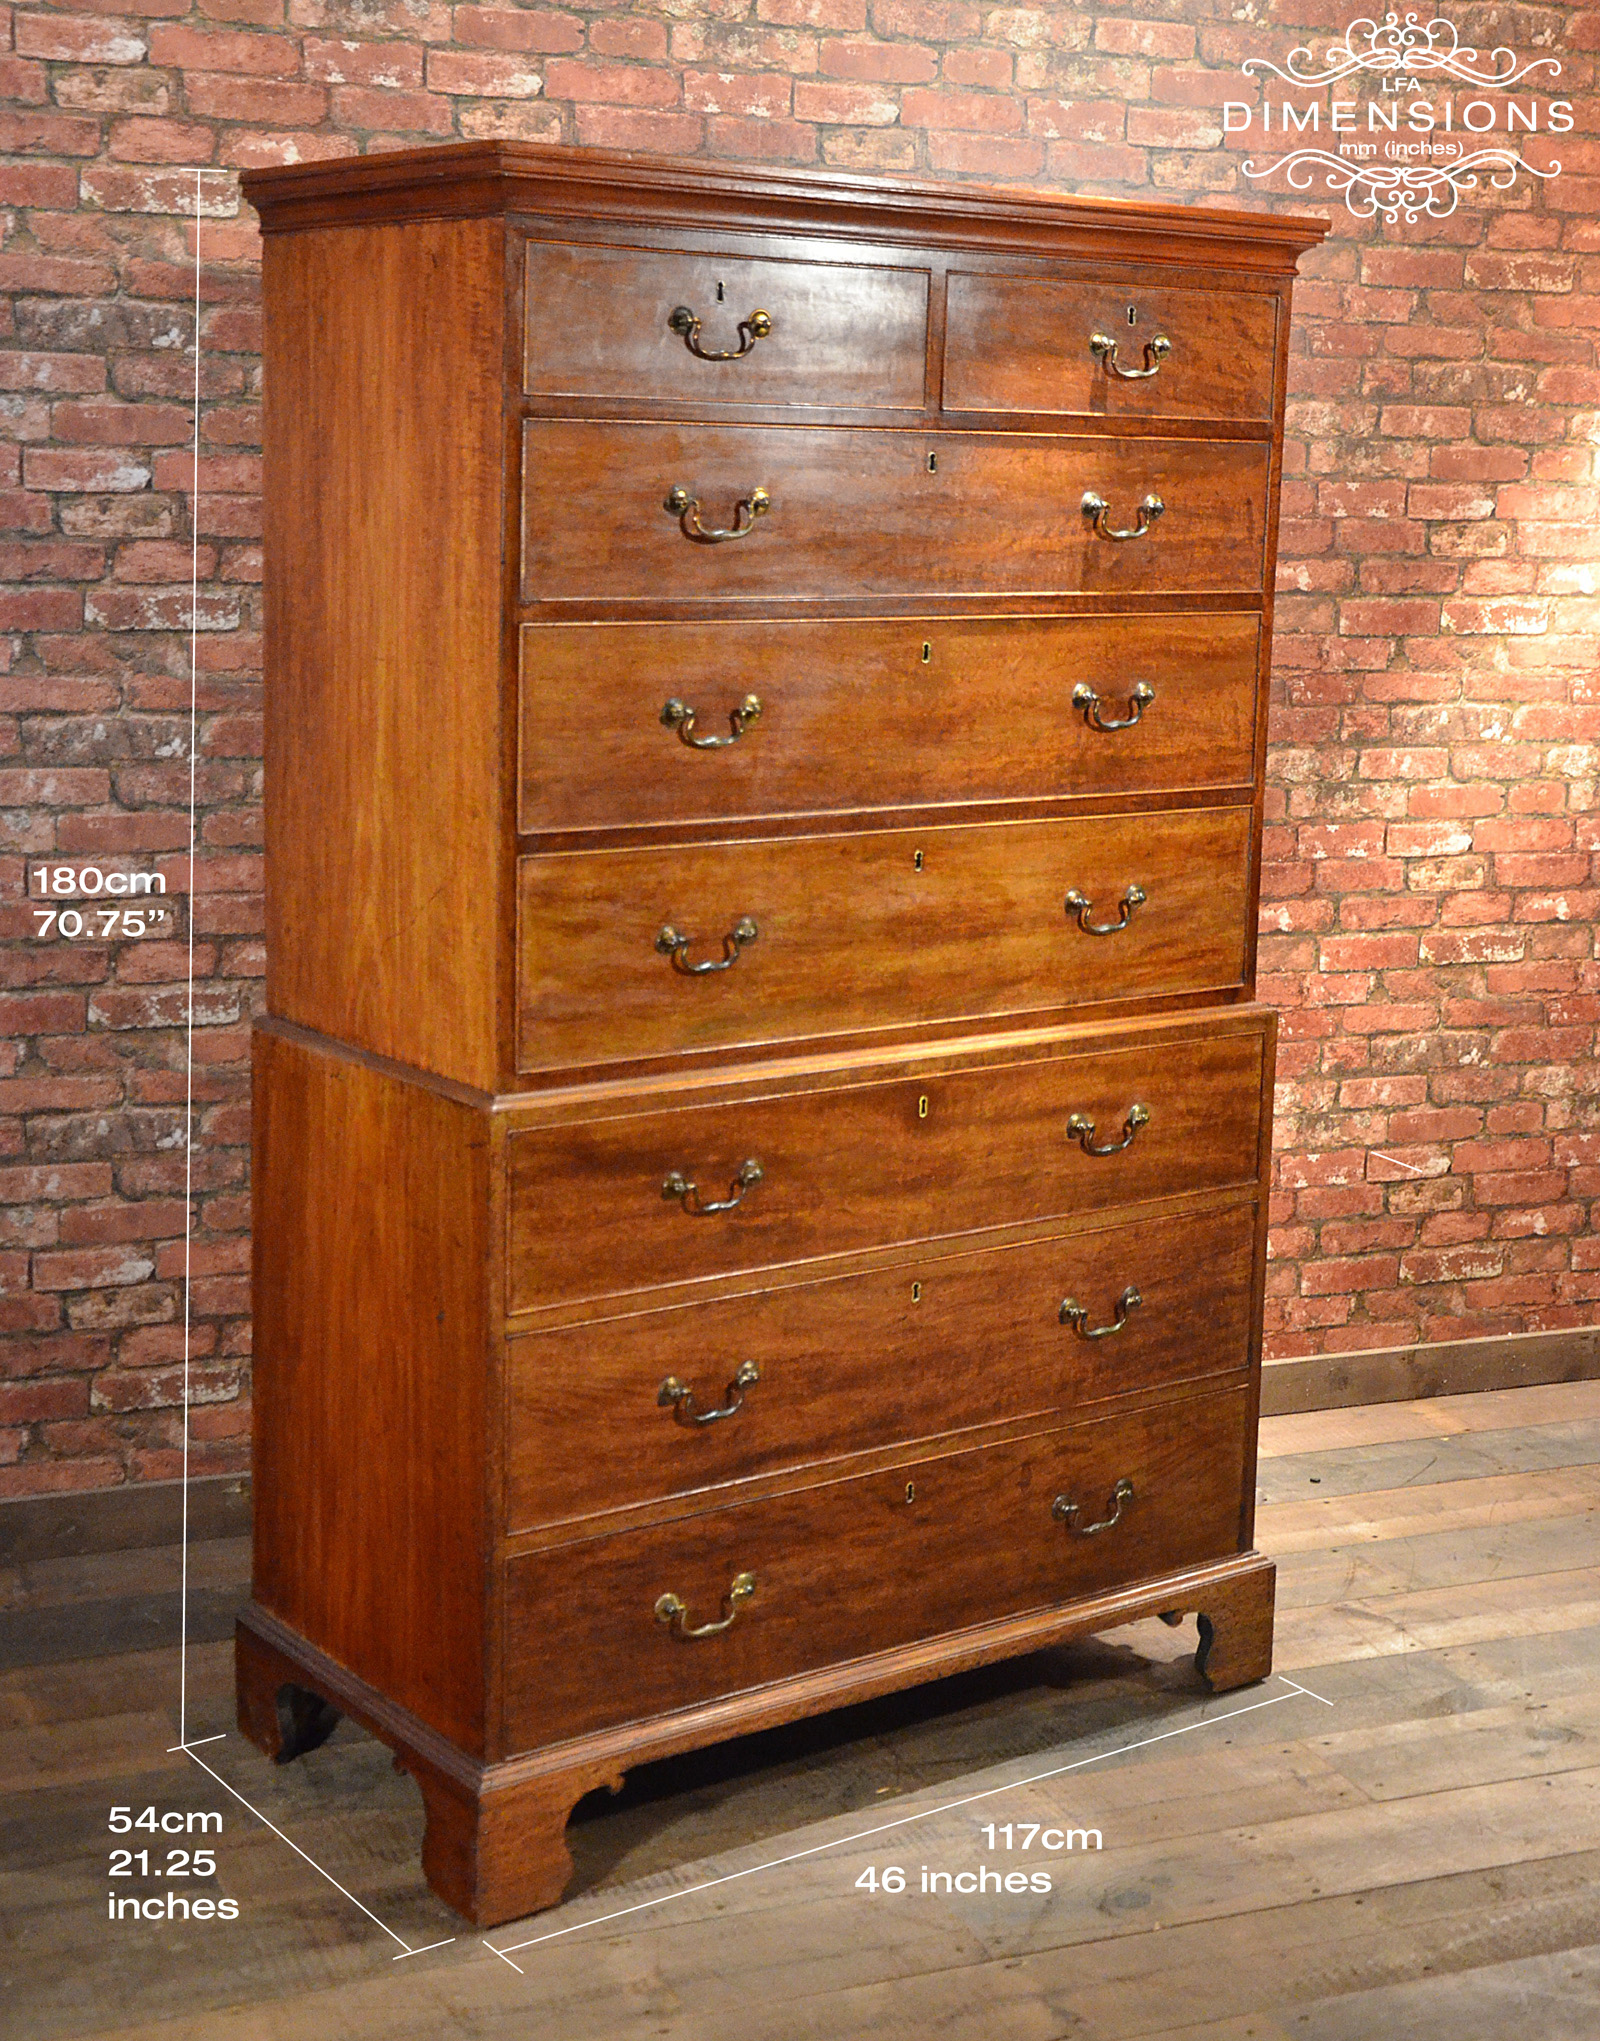 Antique Chest Of Drawers Georgian Mahogany Chest-on-chest English c.1760 For Sale | 0 ...